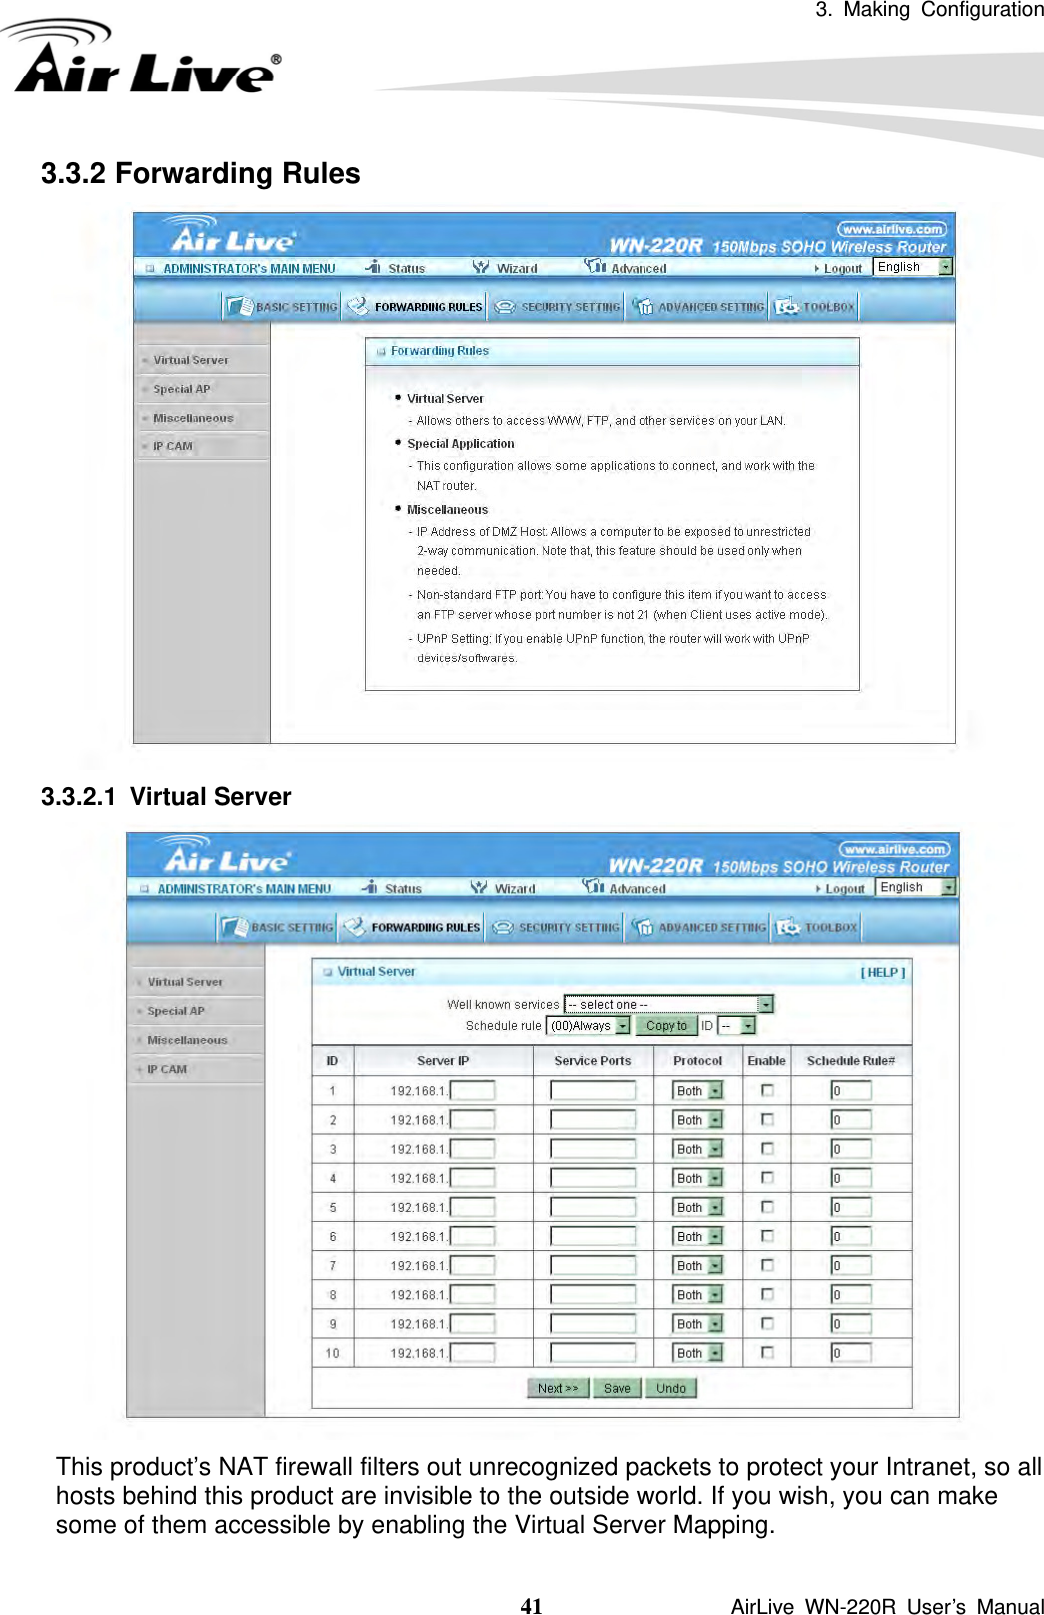 3. Making Configuration  41               AirLive WN-220R User’s Manual 3.3.2 Forwarding Rules  3.3.2.1 Virtual Server  This product’s NAT firewall filters out unrecognized packets to protect your Intranet, so all hosts behind this product are invisible to the outside world. If you wish, you can make some of them accessible by enabling the Virtual Server Mapping. 